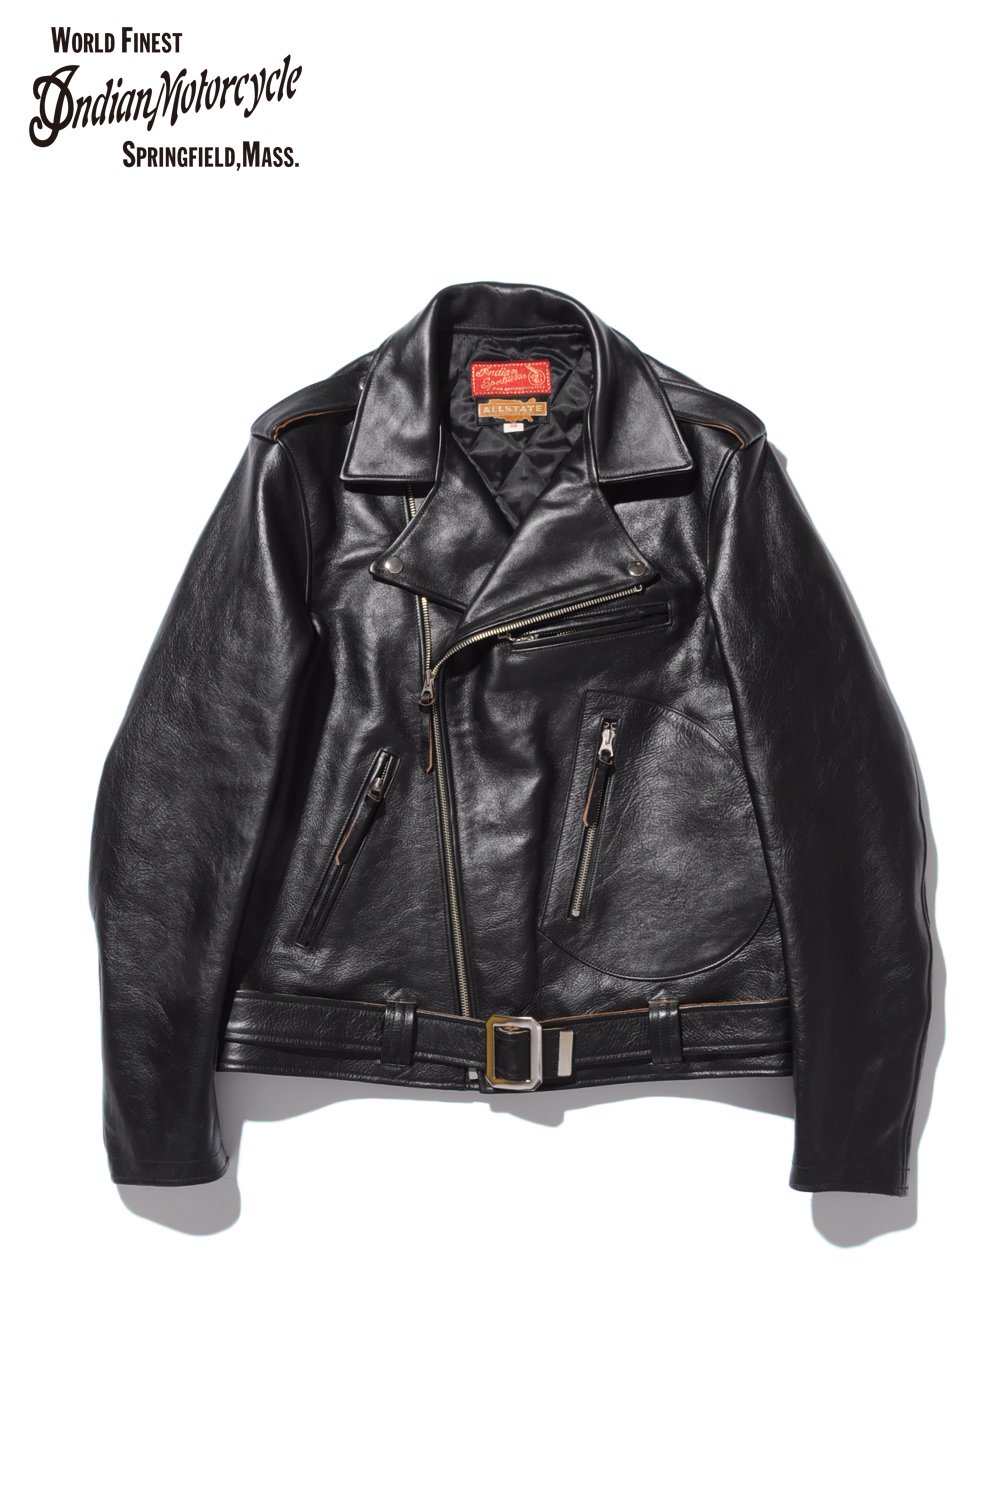 INDIAN MOTORCYCLE(インディアンモーターサイクル) レザージャケット ALLSTATE × INDIAN MOTORCYCLE  HORSEHIDE DOUBLE RIDERS JACKET IM80494 通販正規取扱 | ハーレムストア